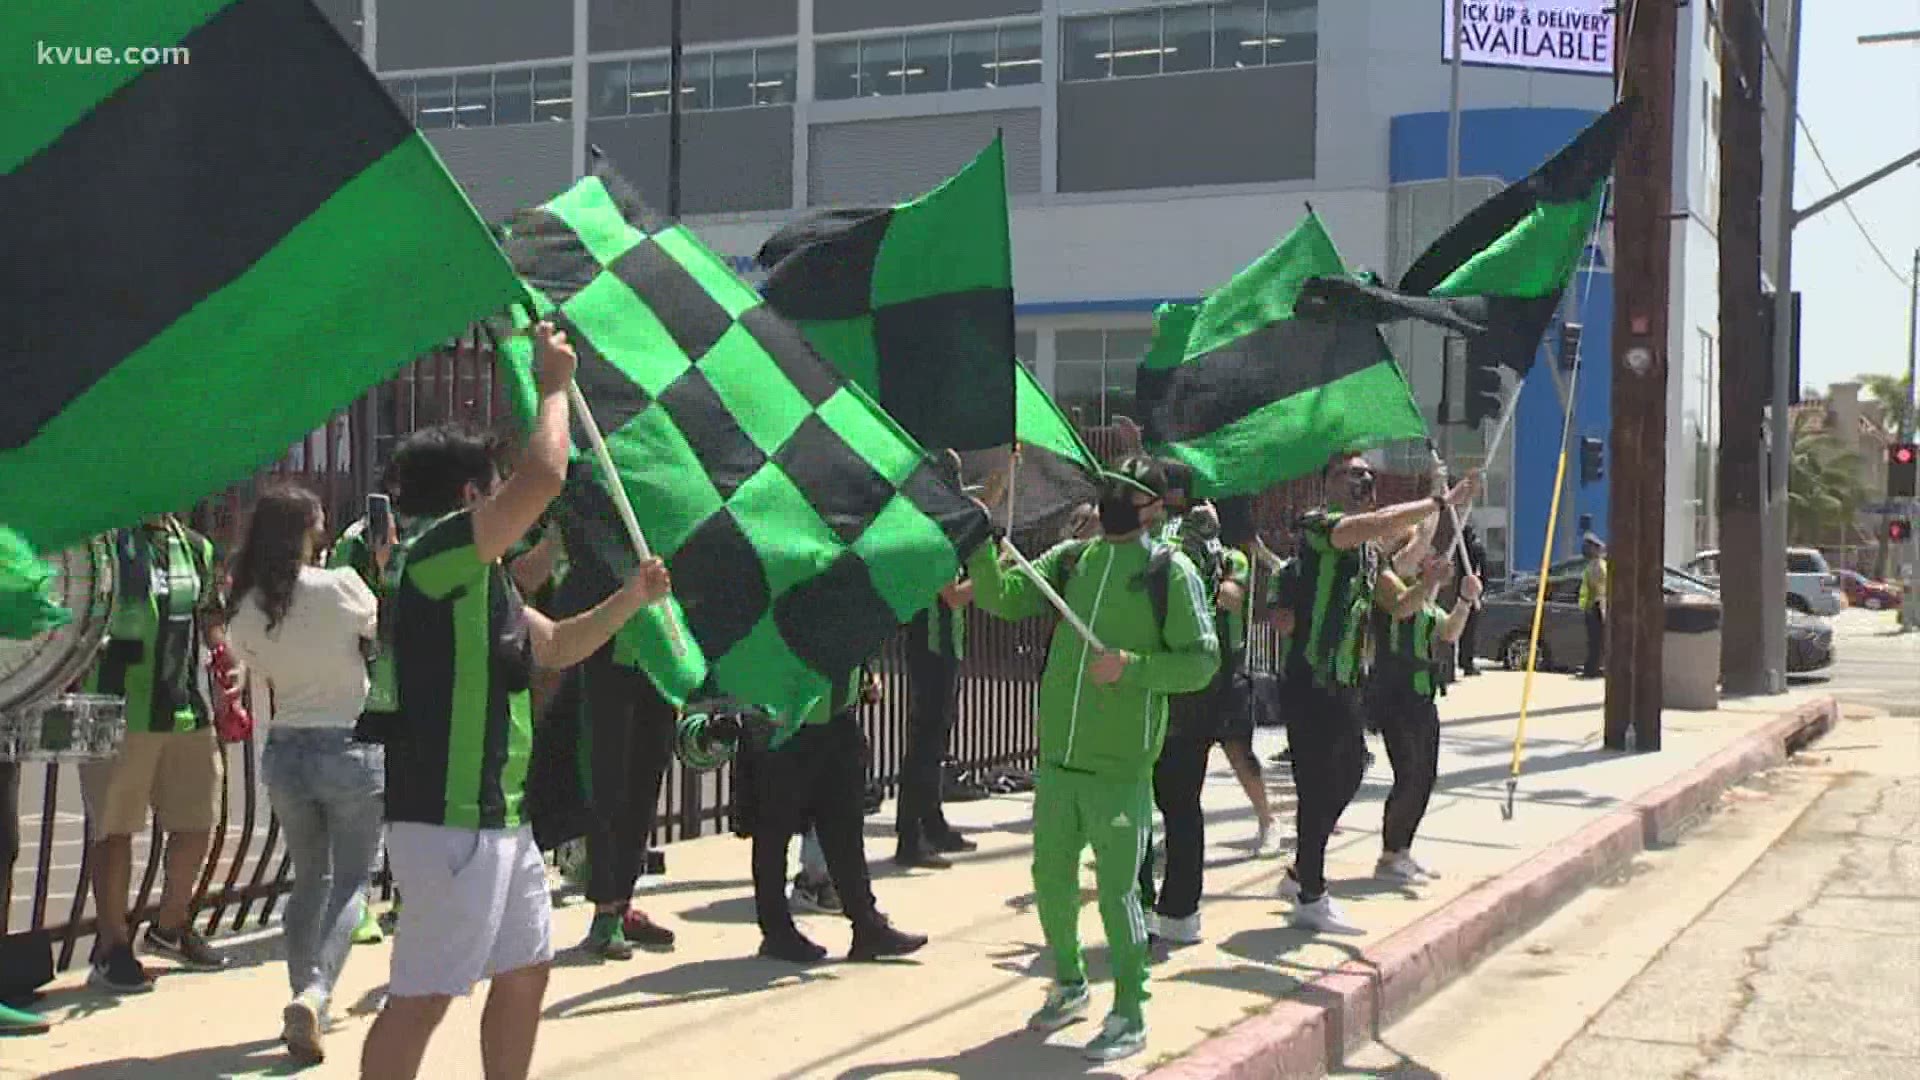 Los Verdes have traveled over 1,200 miles to be in L.A. for the first regular season match in Austin FC history. They share their emotion over the moment.